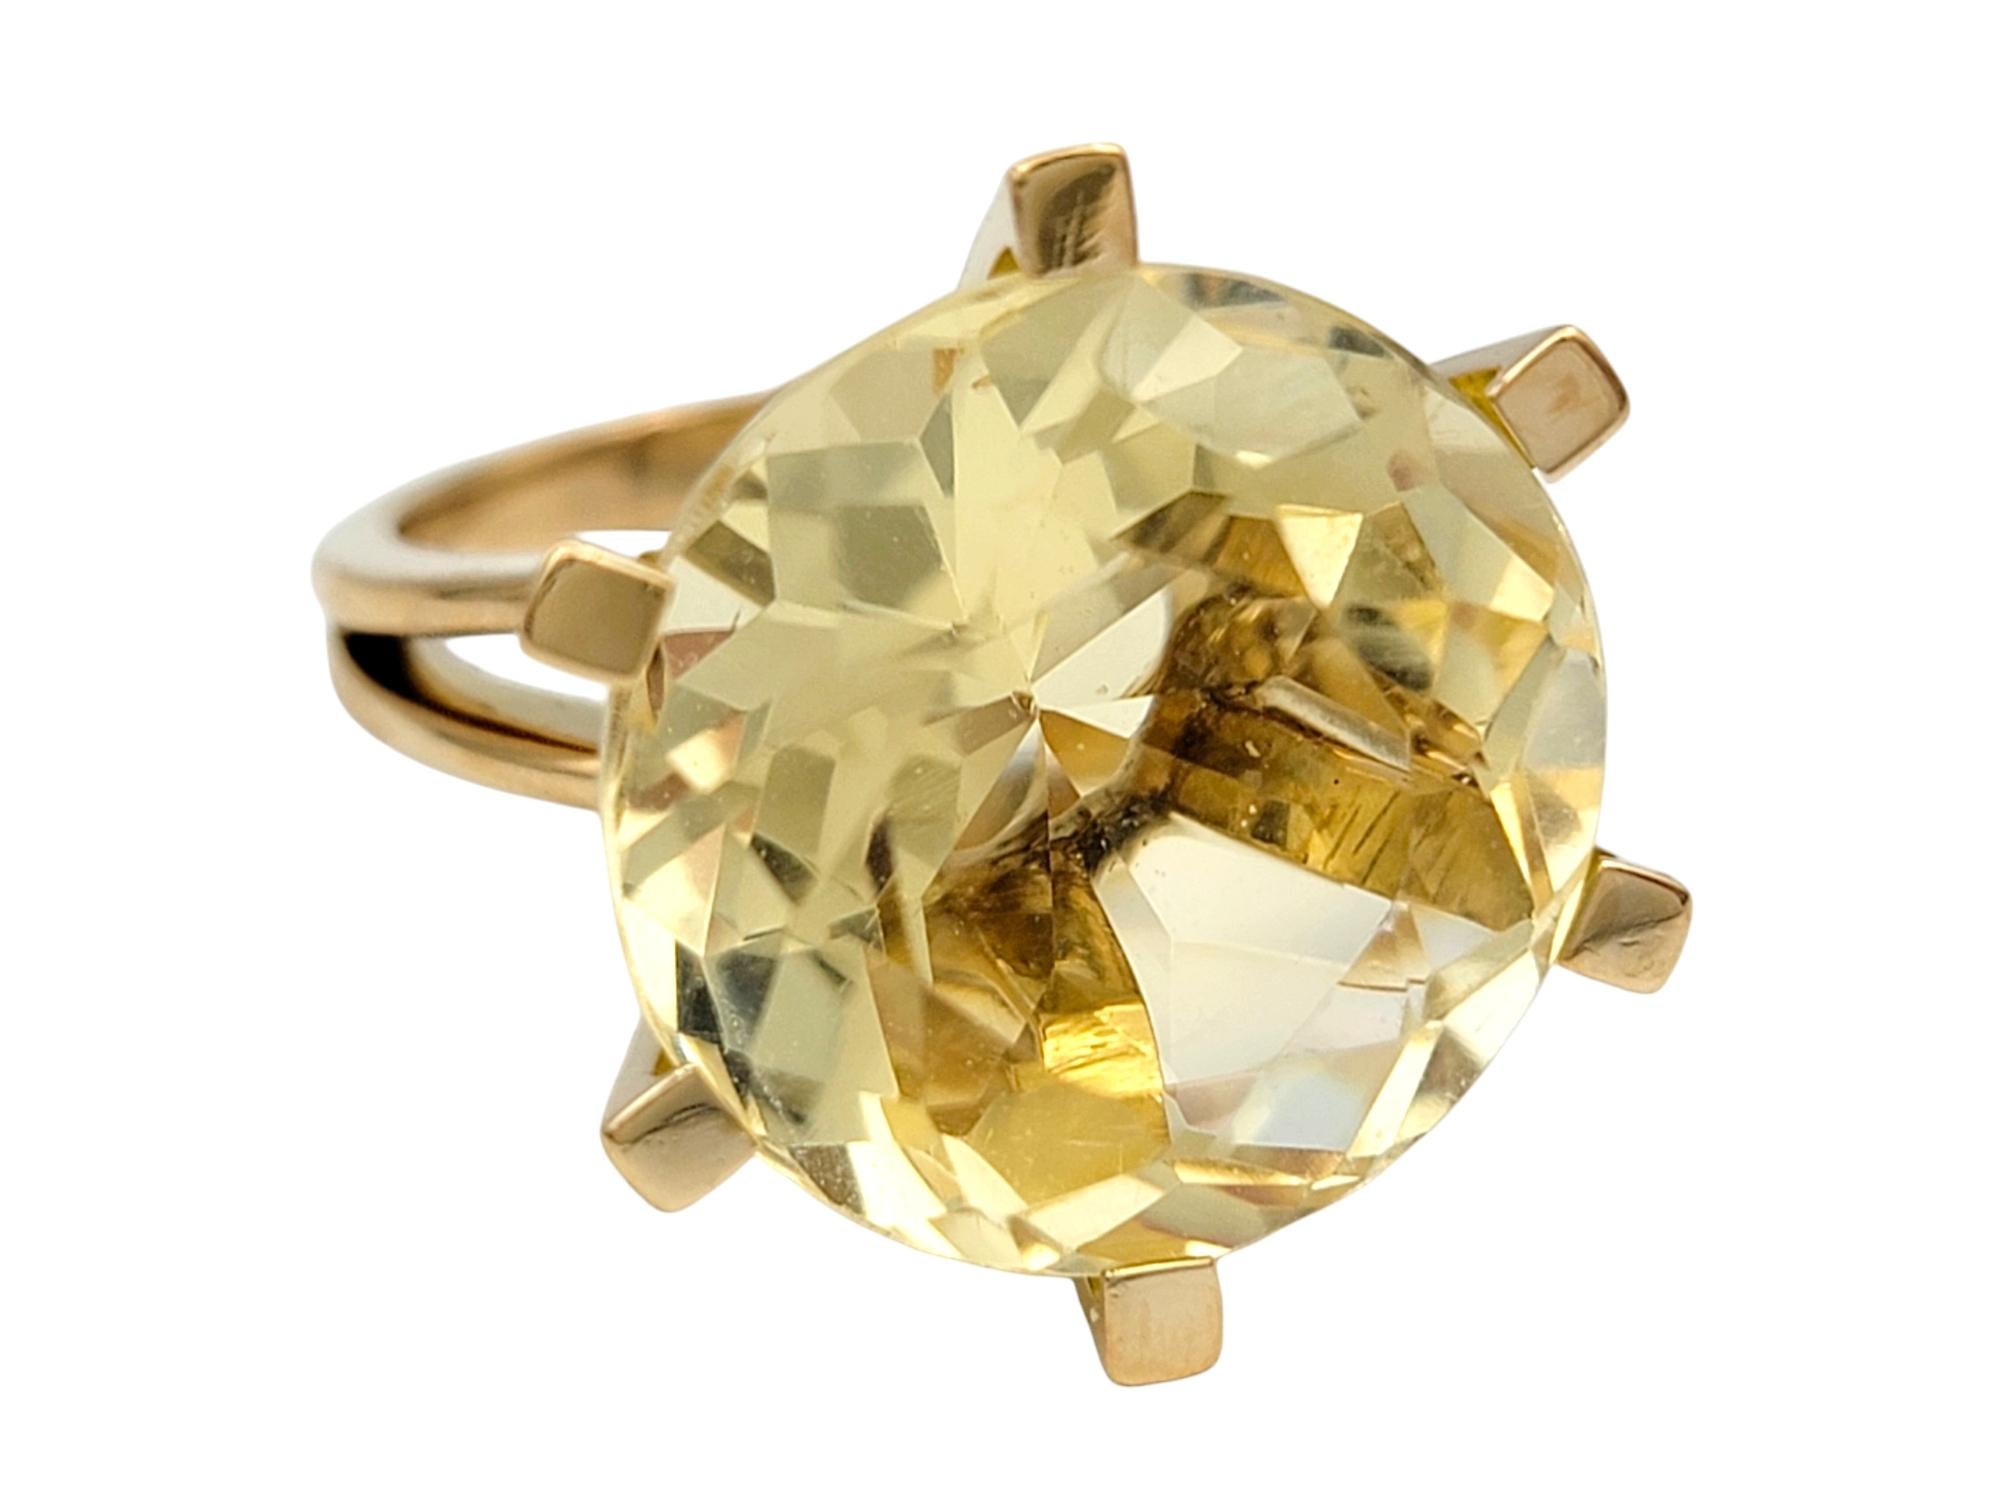 Ring Size: 6

Exuding warmth and radiance, this statement ring is a stunning showcase of elegance and sophistication. Set in 14 karat yellow gold, the centerpiece of this ring is a breathtaking 11.8 carat round citrine, captivating the eye with its